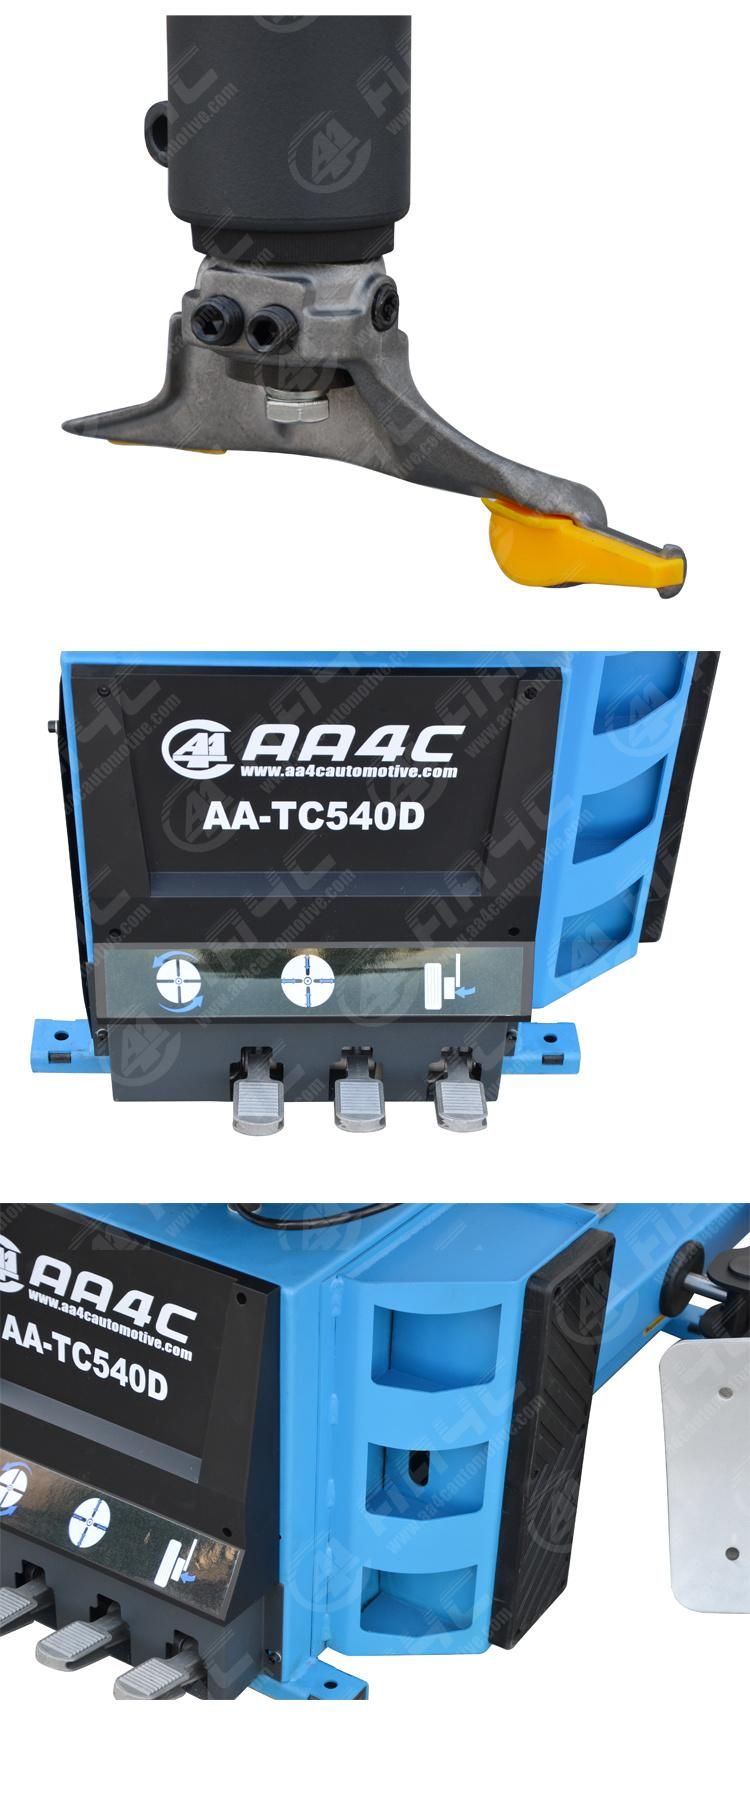 AA4c Car Tire Changer Tire Changing Machine Tyre Changer with Double Helper with Fast Inflation AA-Tc540d